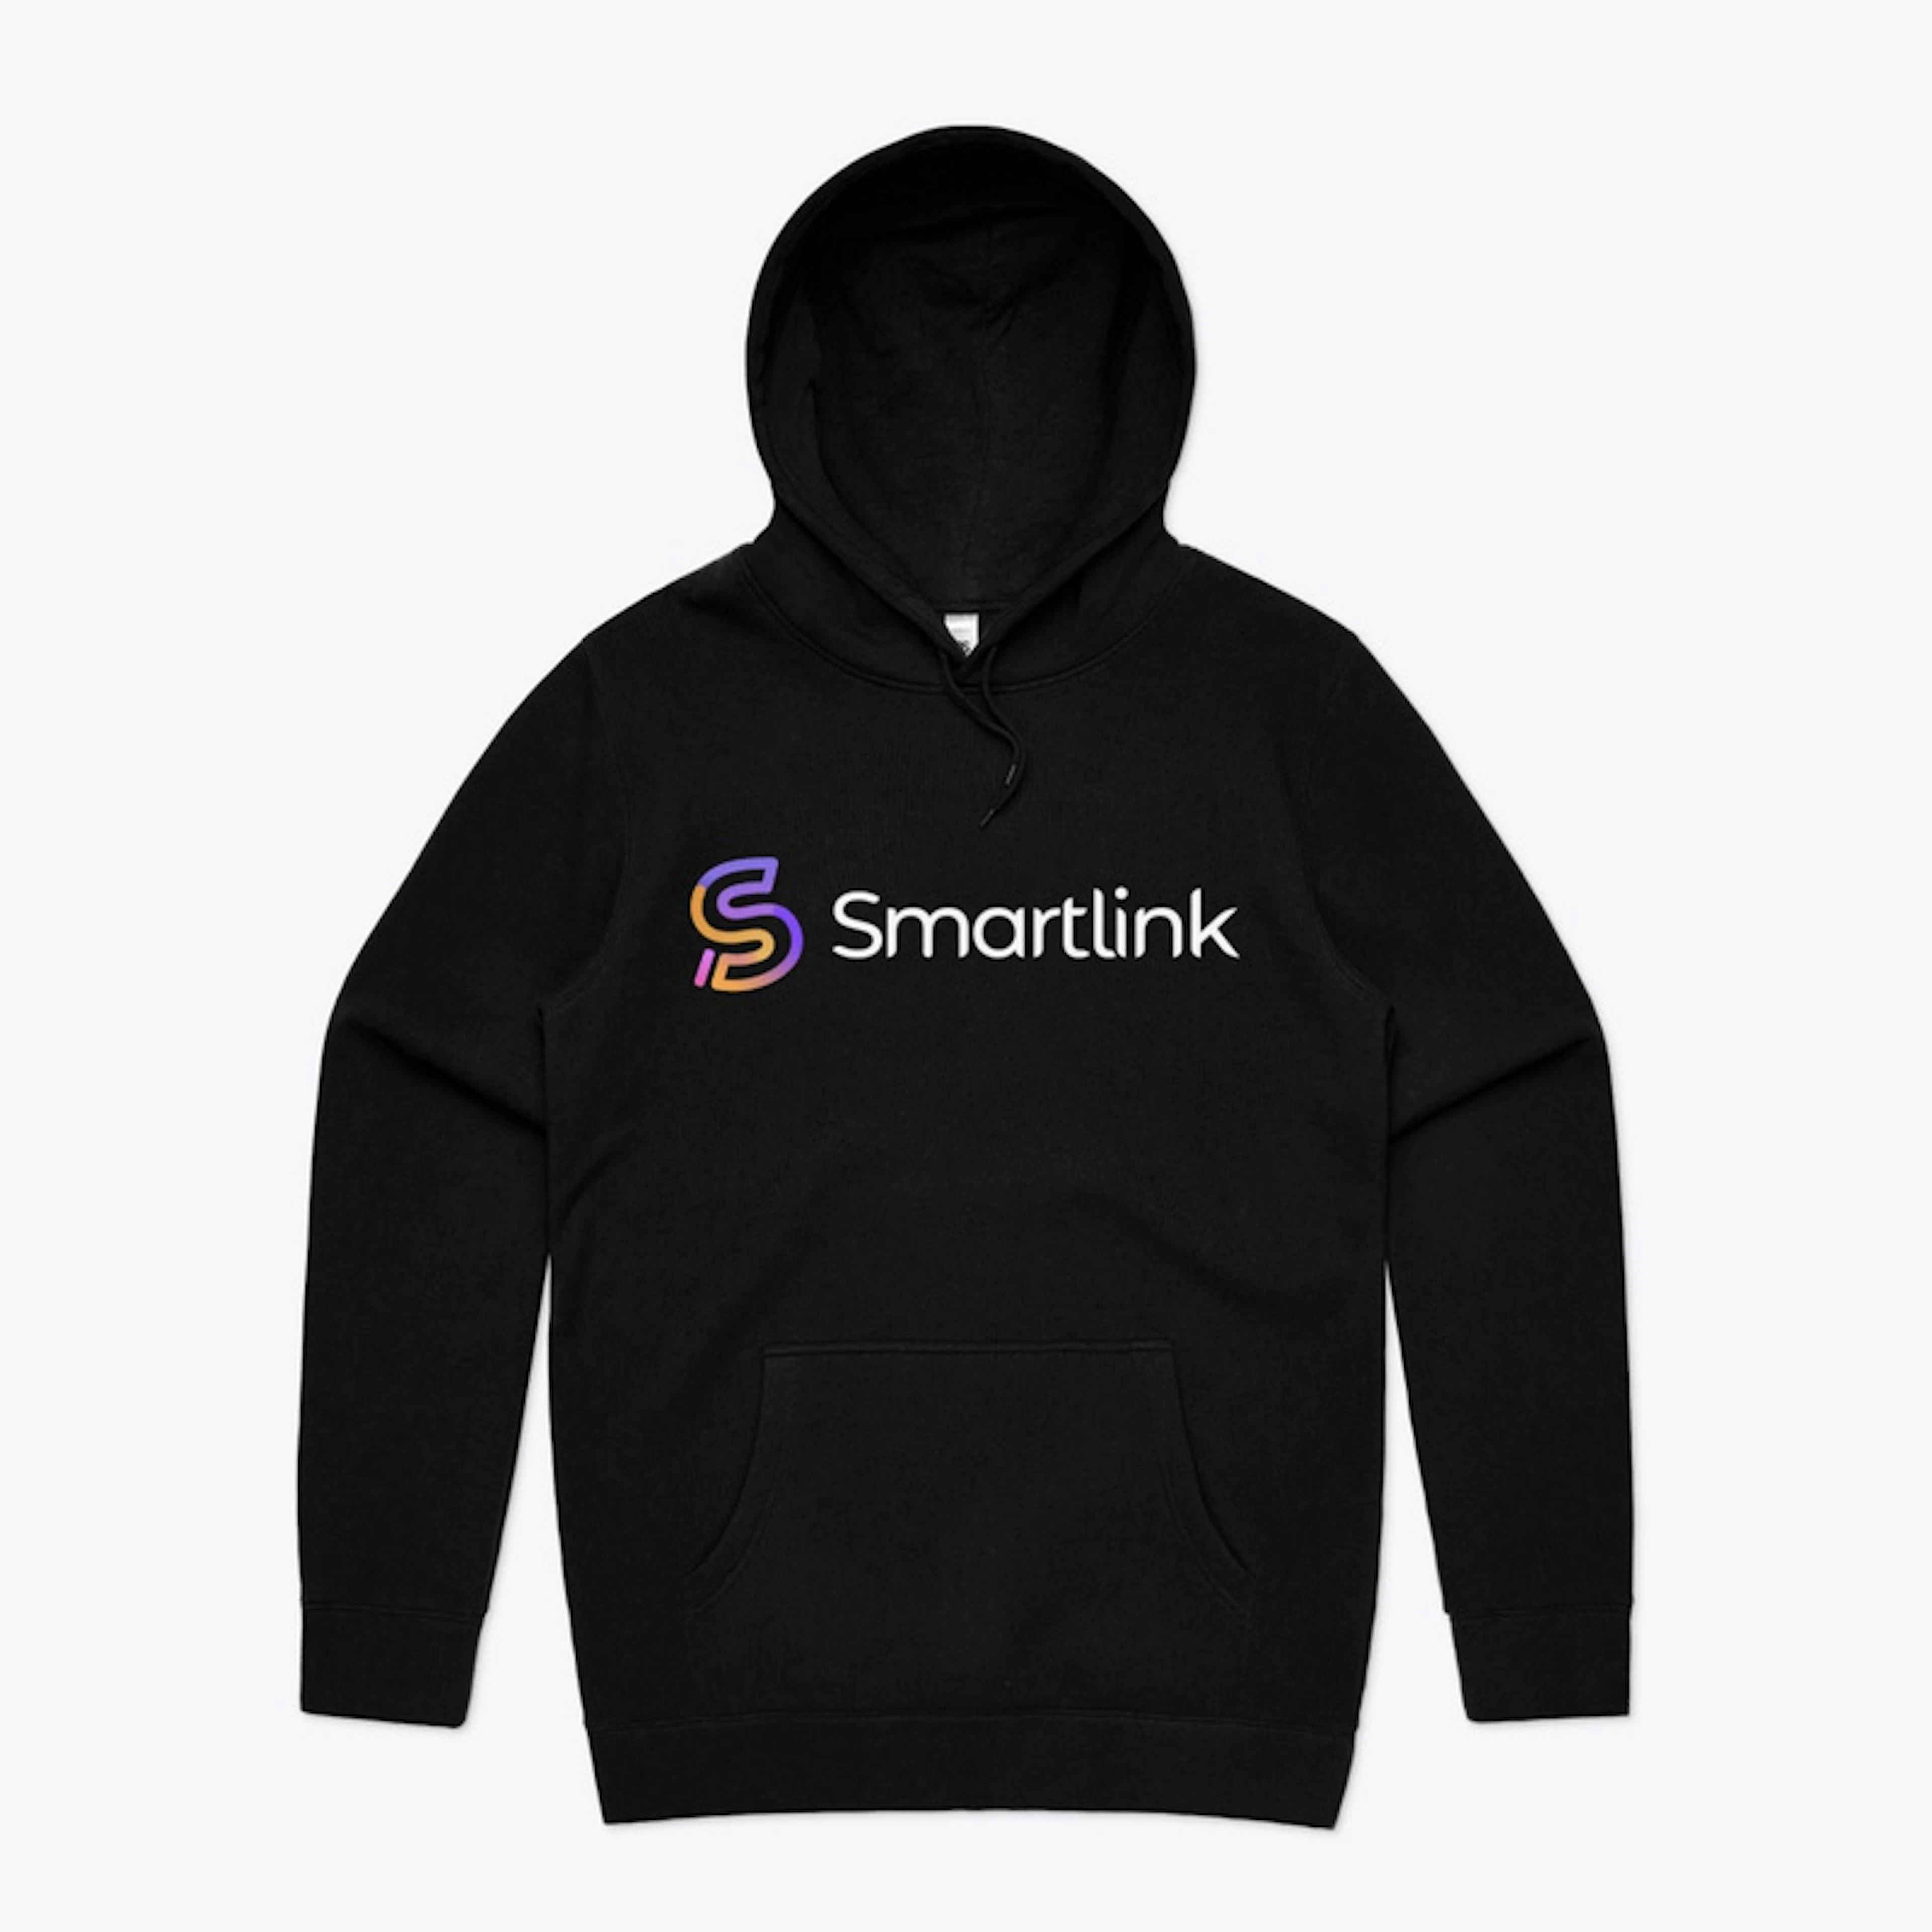 Smartlink apparel to SMAK your Lifestyle